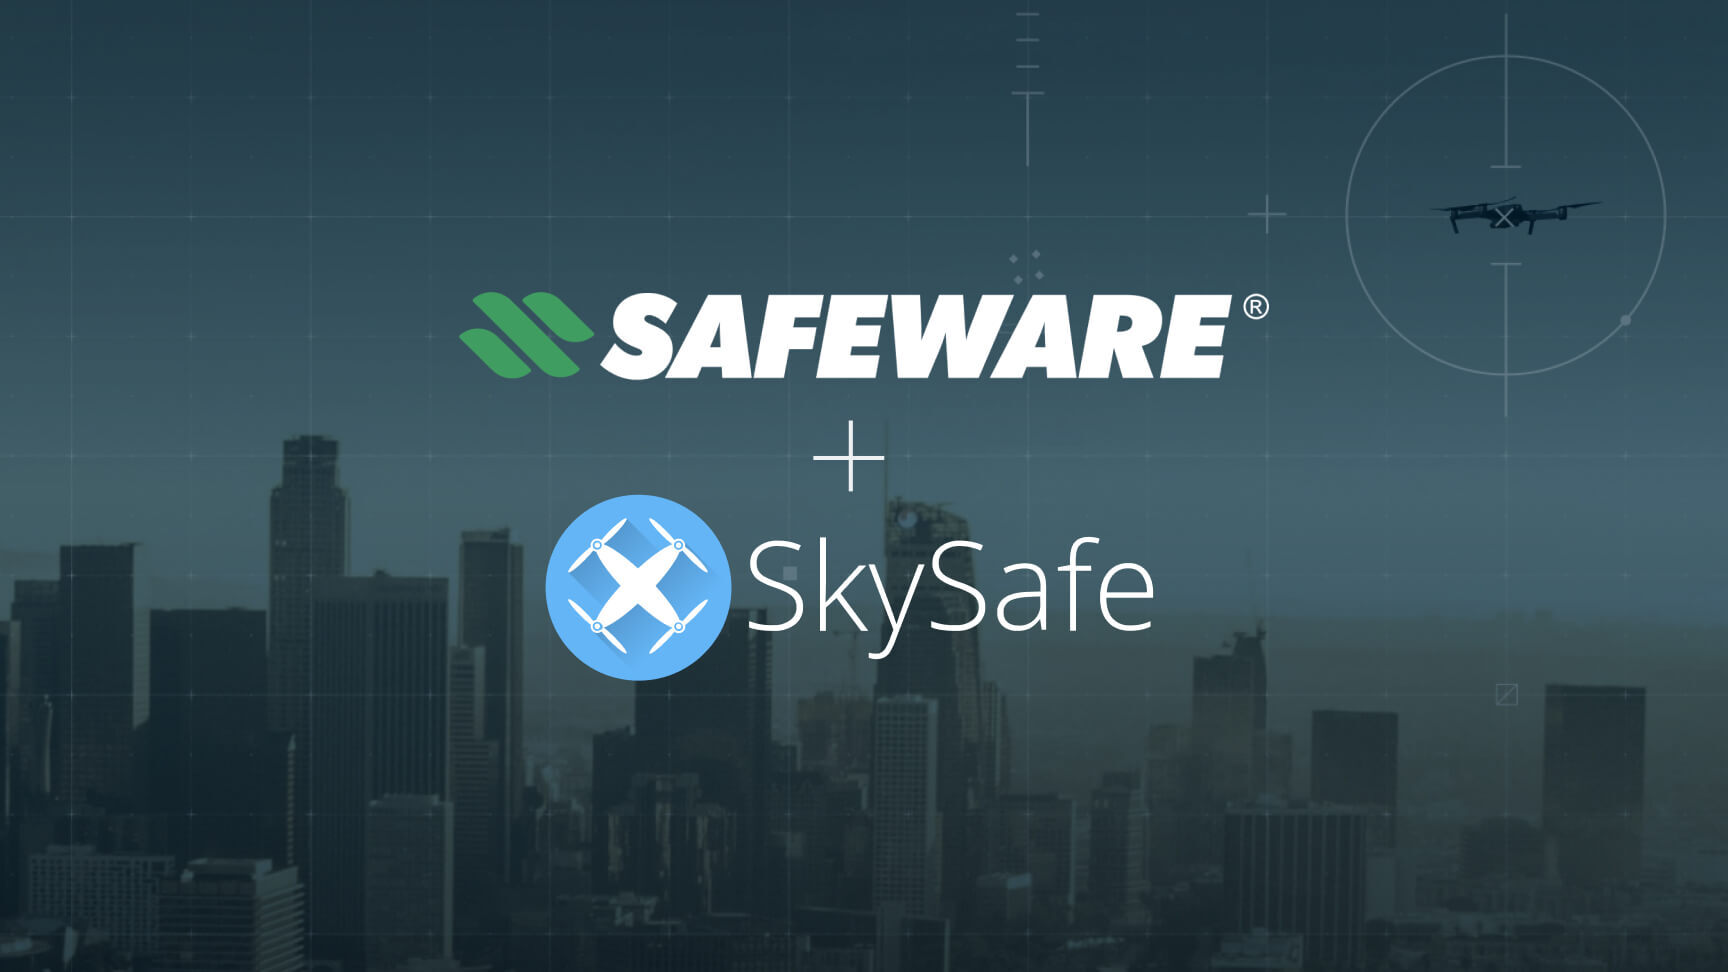 Safeware Adds SkySafe’s Industry-First, Drone Airspace Management and Intelligence Platform To Its Portfolio